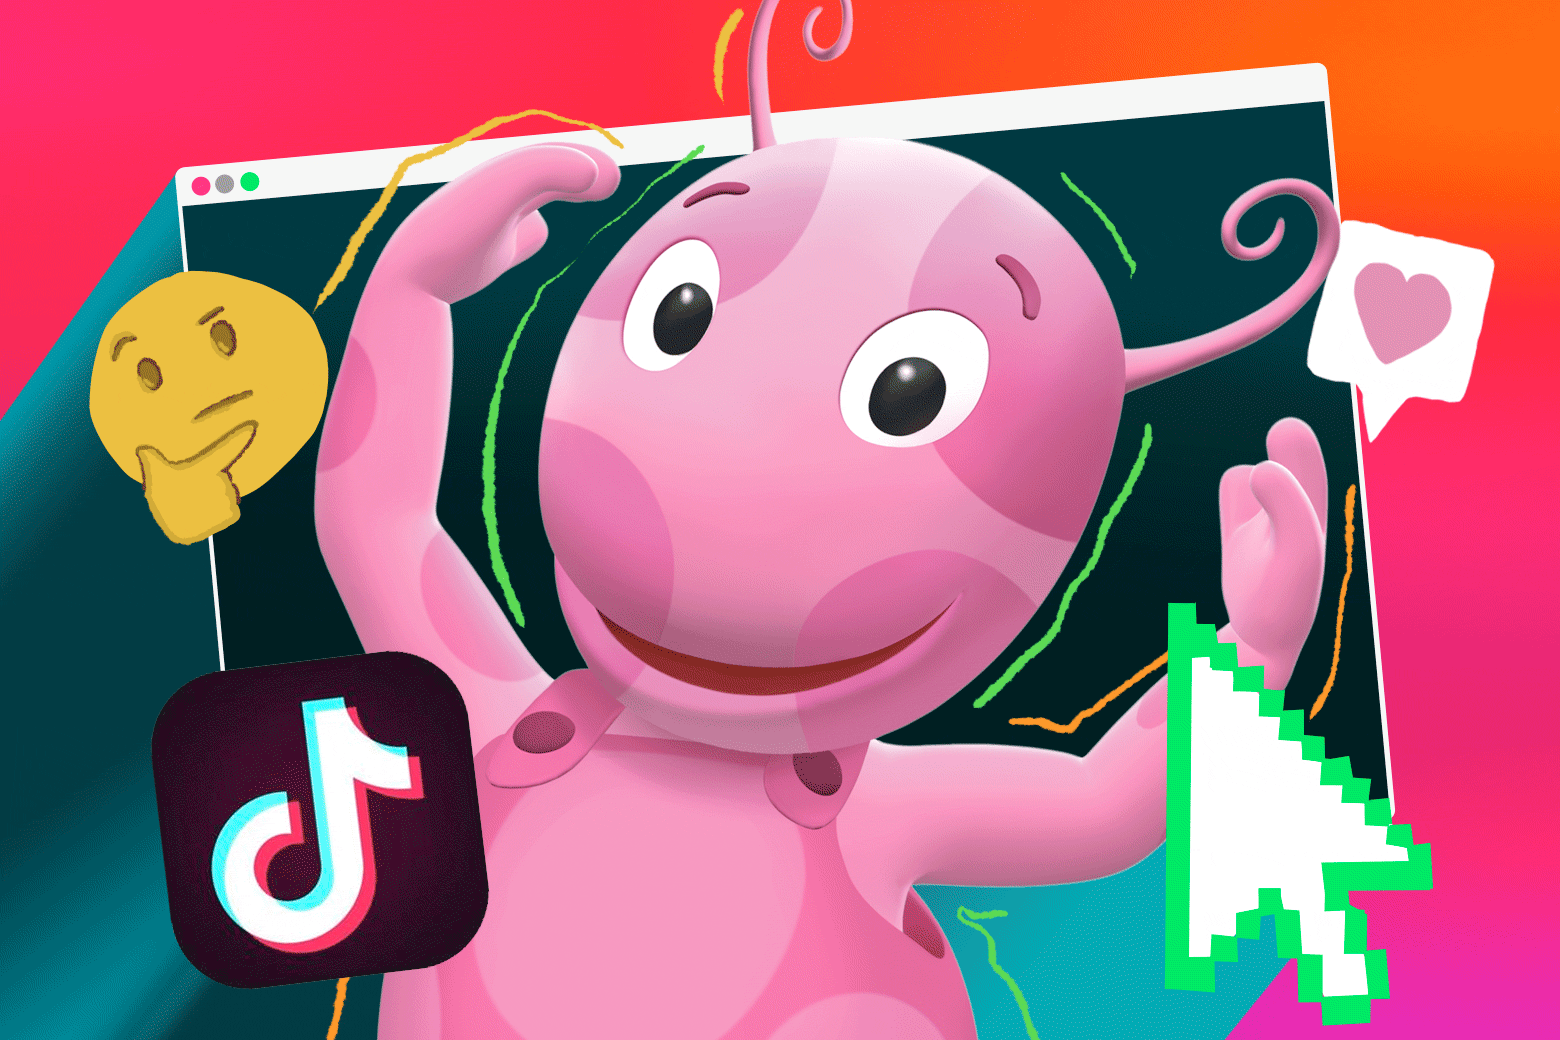 A big pink animal in overalls surrounded by an animated thinking-face emoji and the TikTok logo